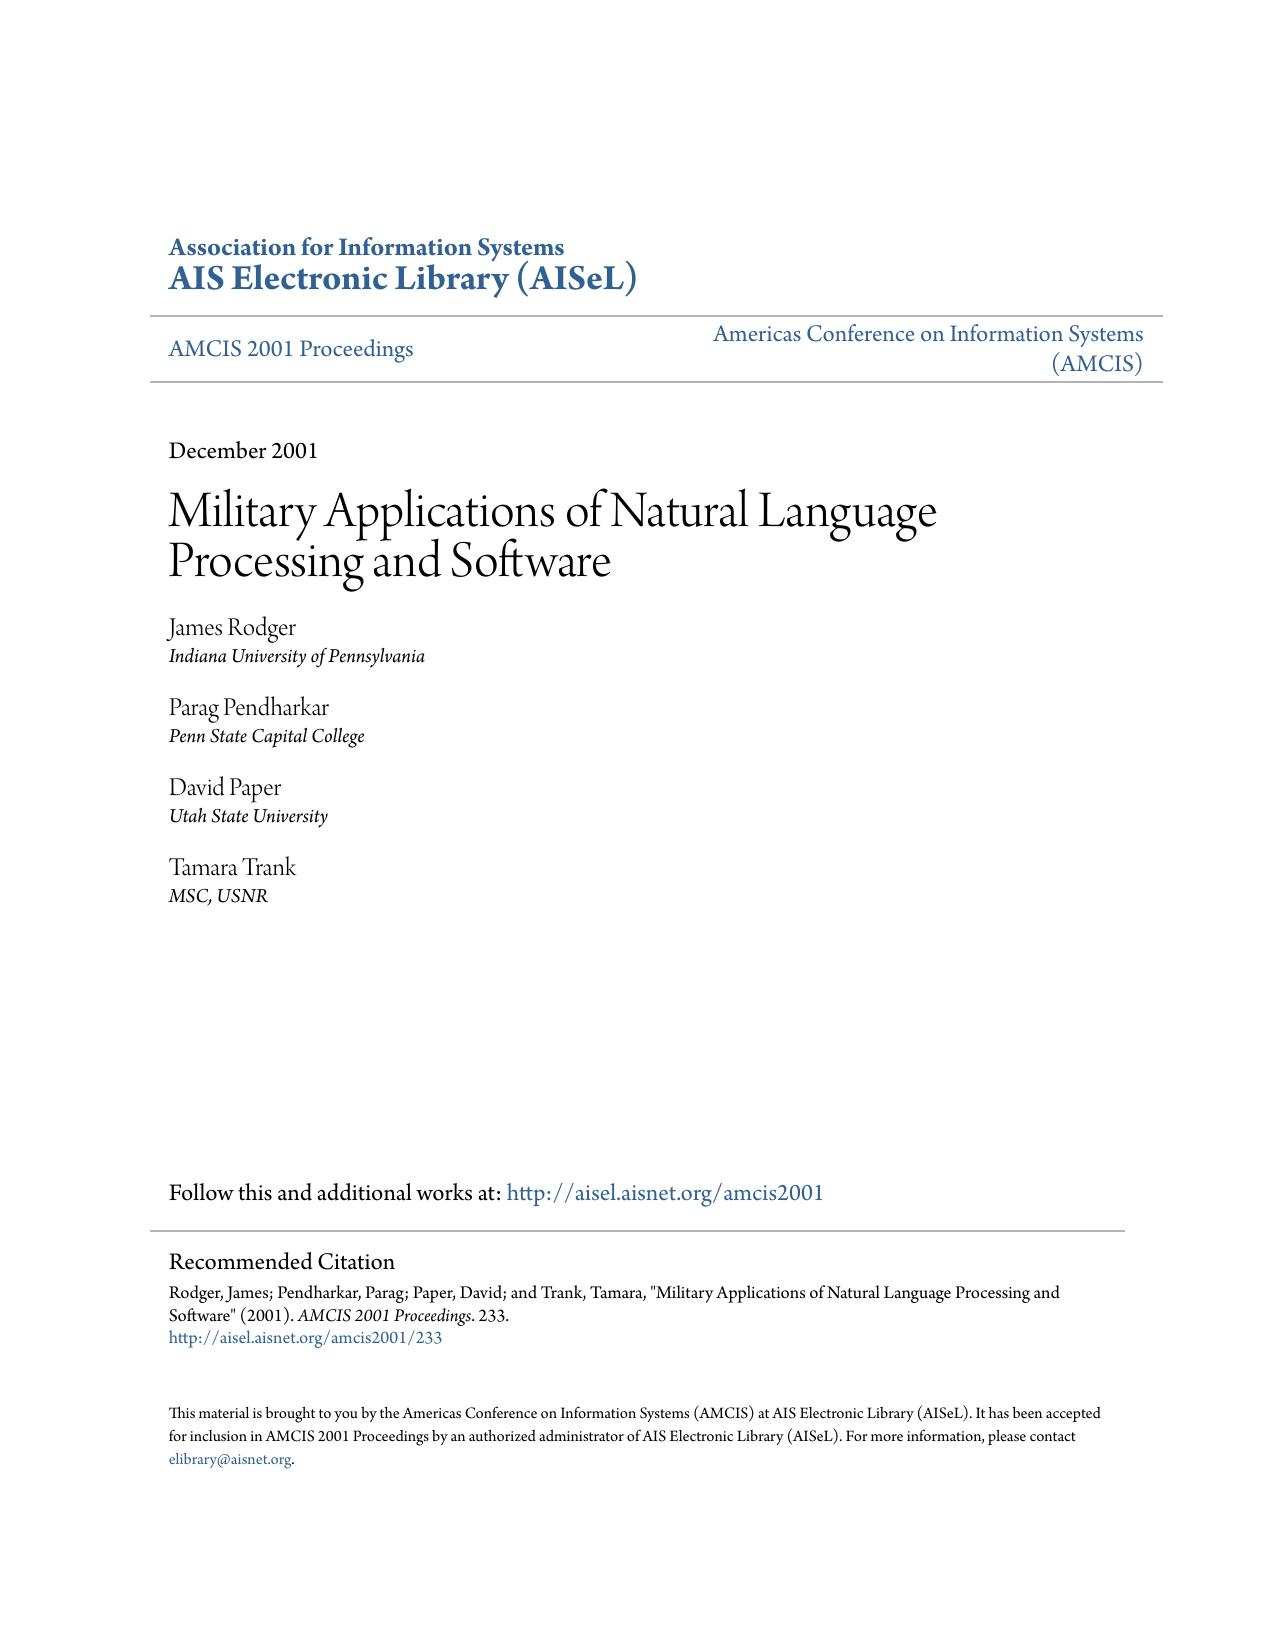 Military Applications of Natural Language Processing and Software - Paper